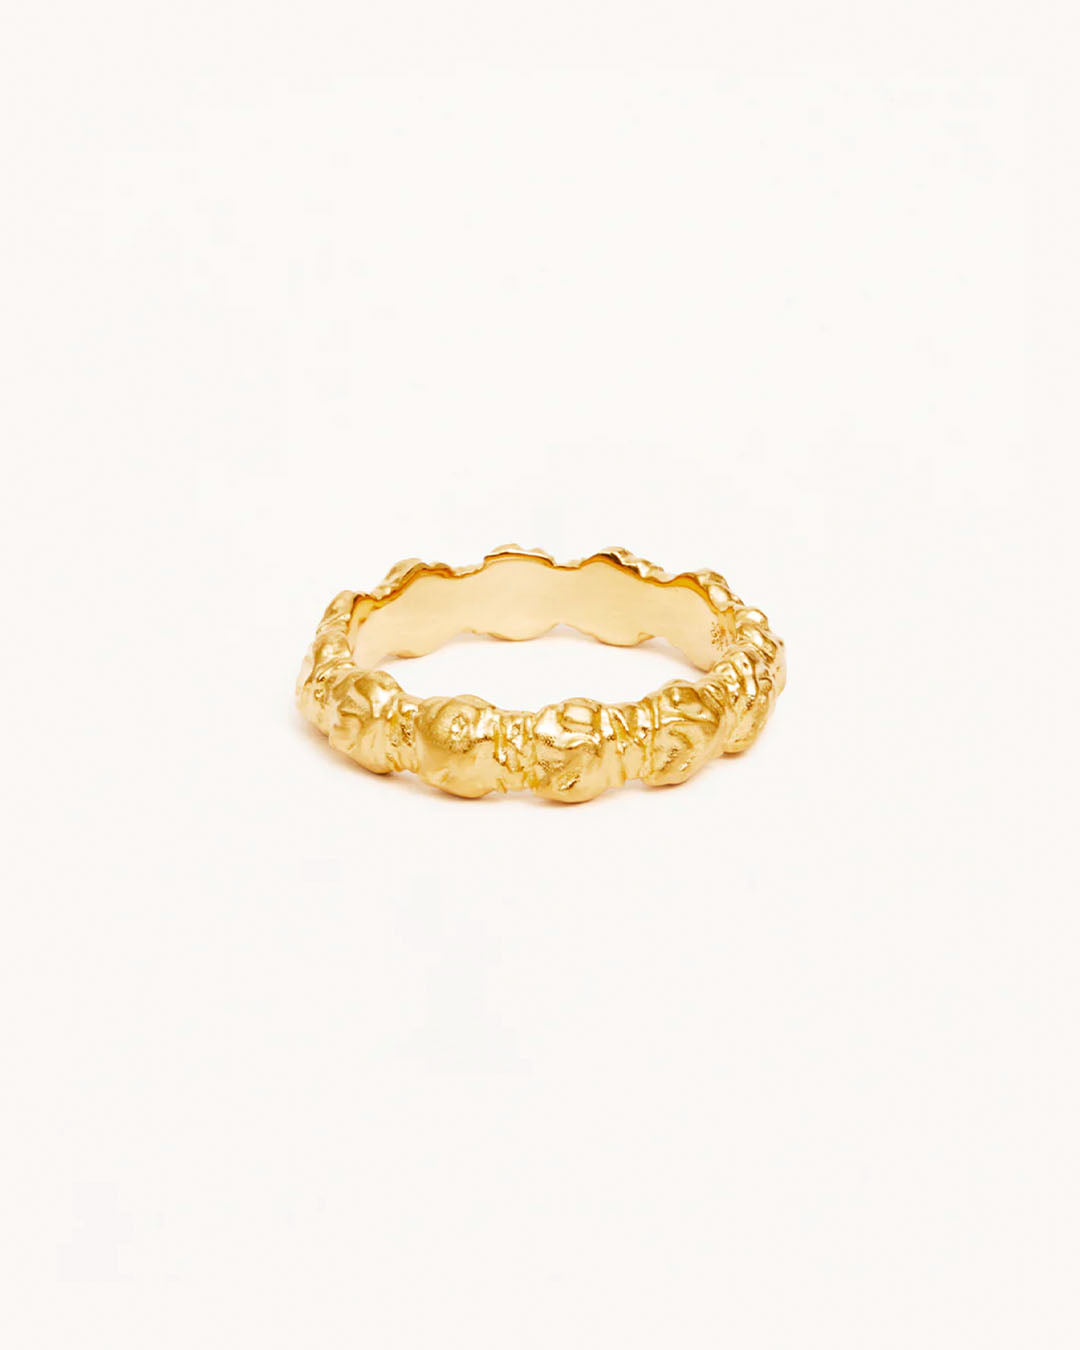 18k Gold Vermeil All Kinds of Beautiful Ring Jewellery by By Charlotte - Prae Wellness